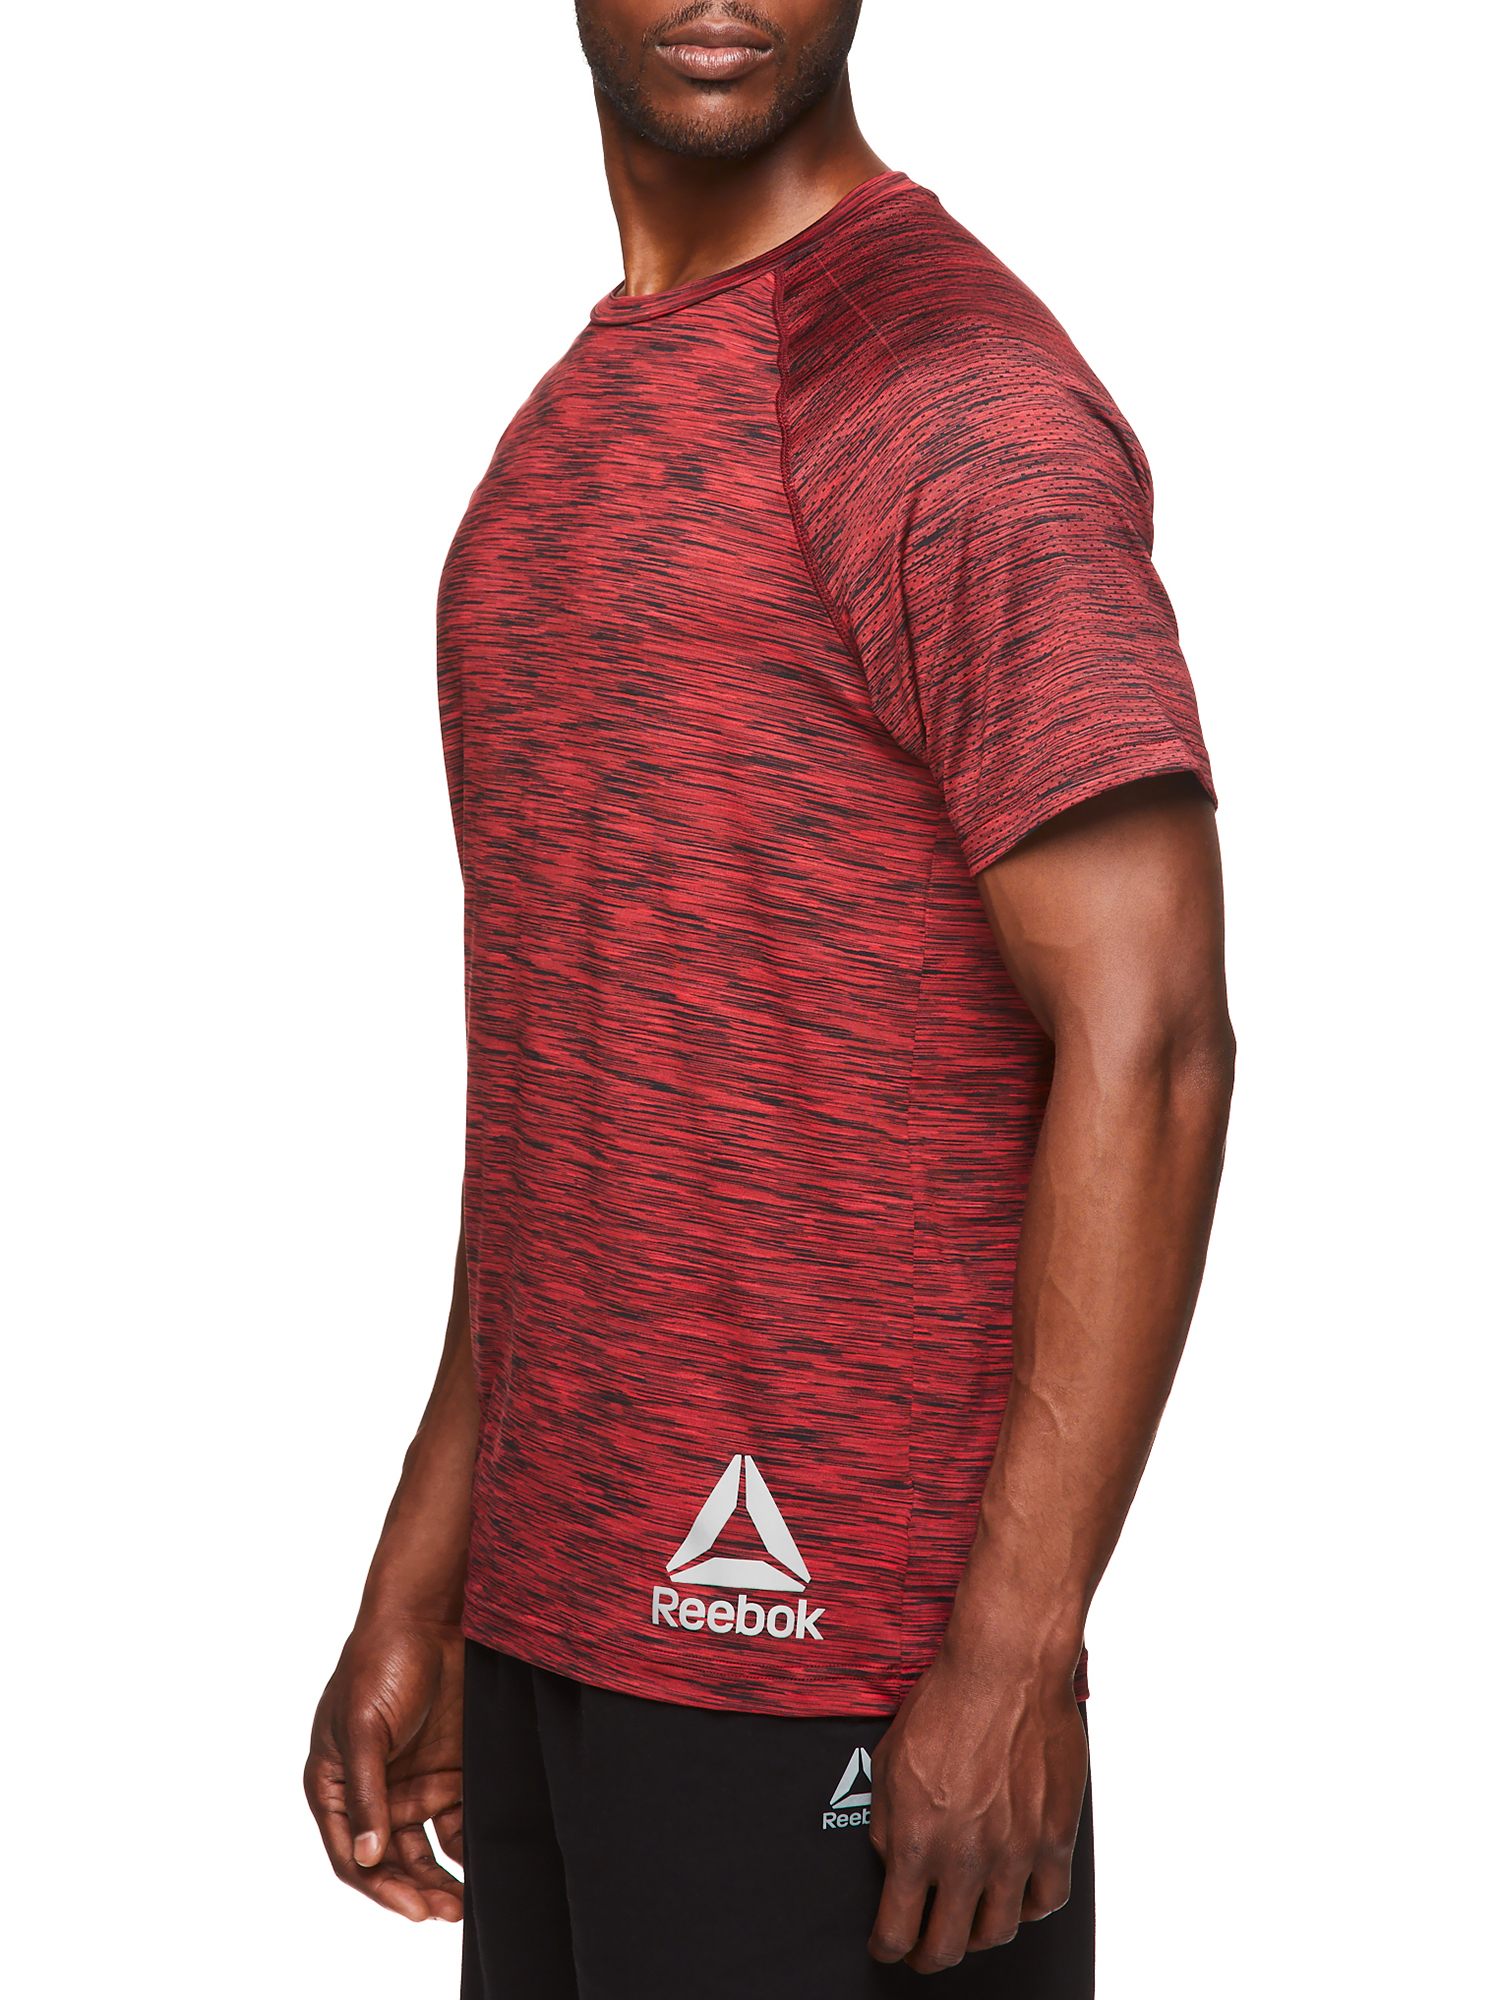 Reebok Men's and Big Men's Active Short Sleeve Tee with Mesh Sleeves, up to Size 3XL - image 2 of 4